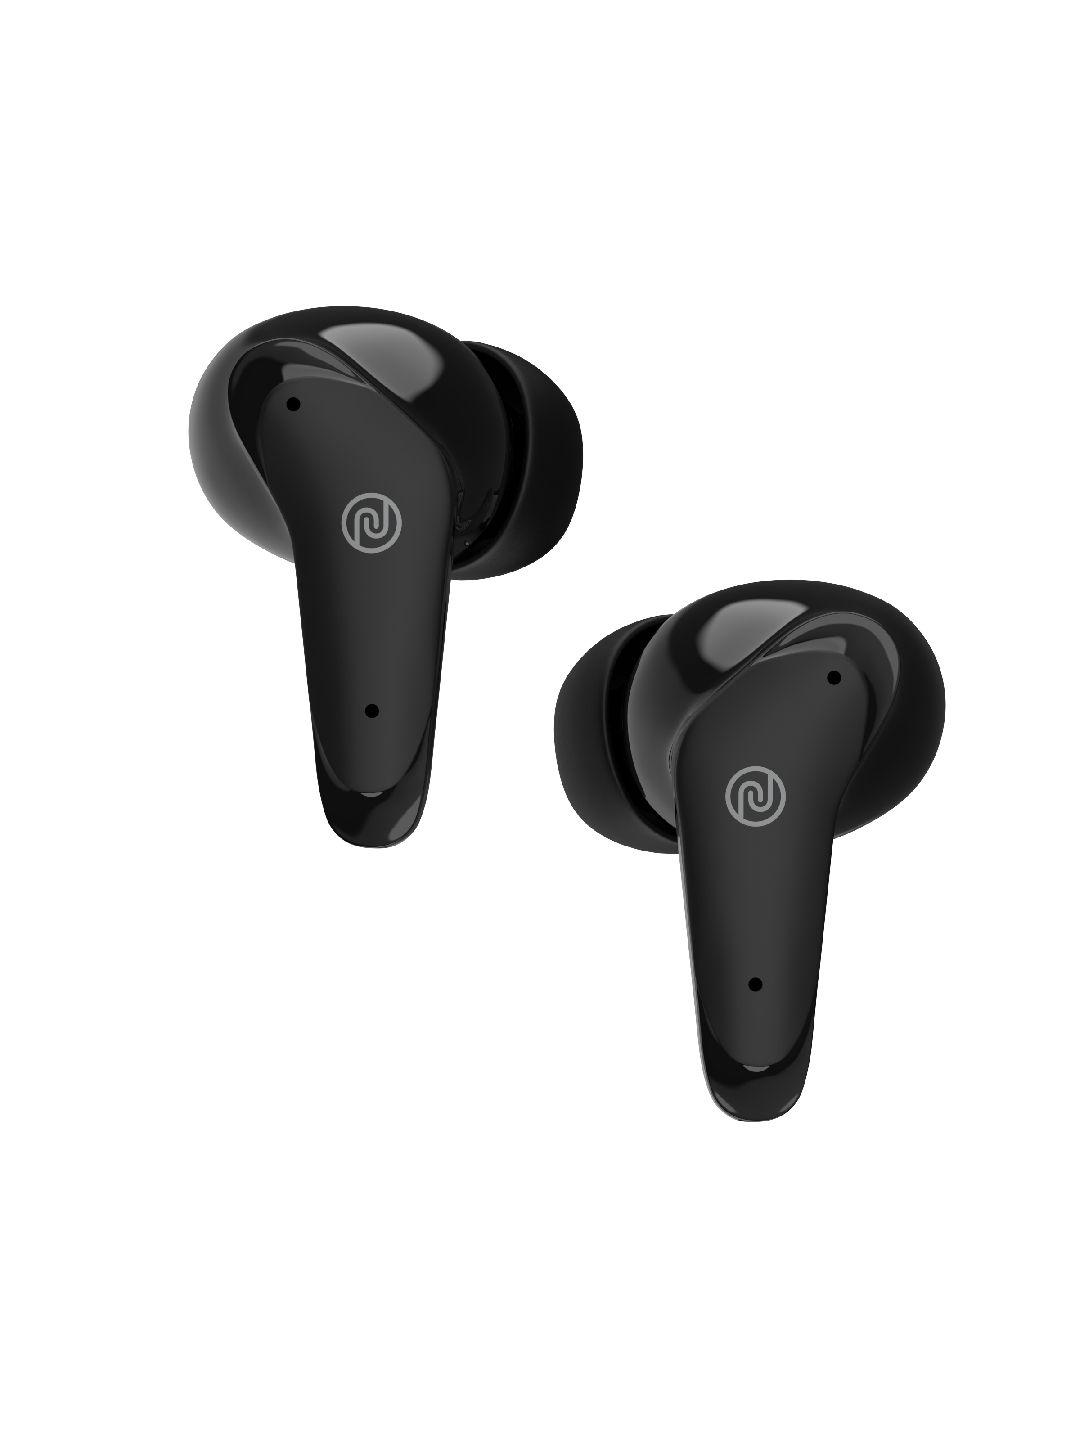 noise buds vs102 plus truly wireless earbuds with 70hrs playtime